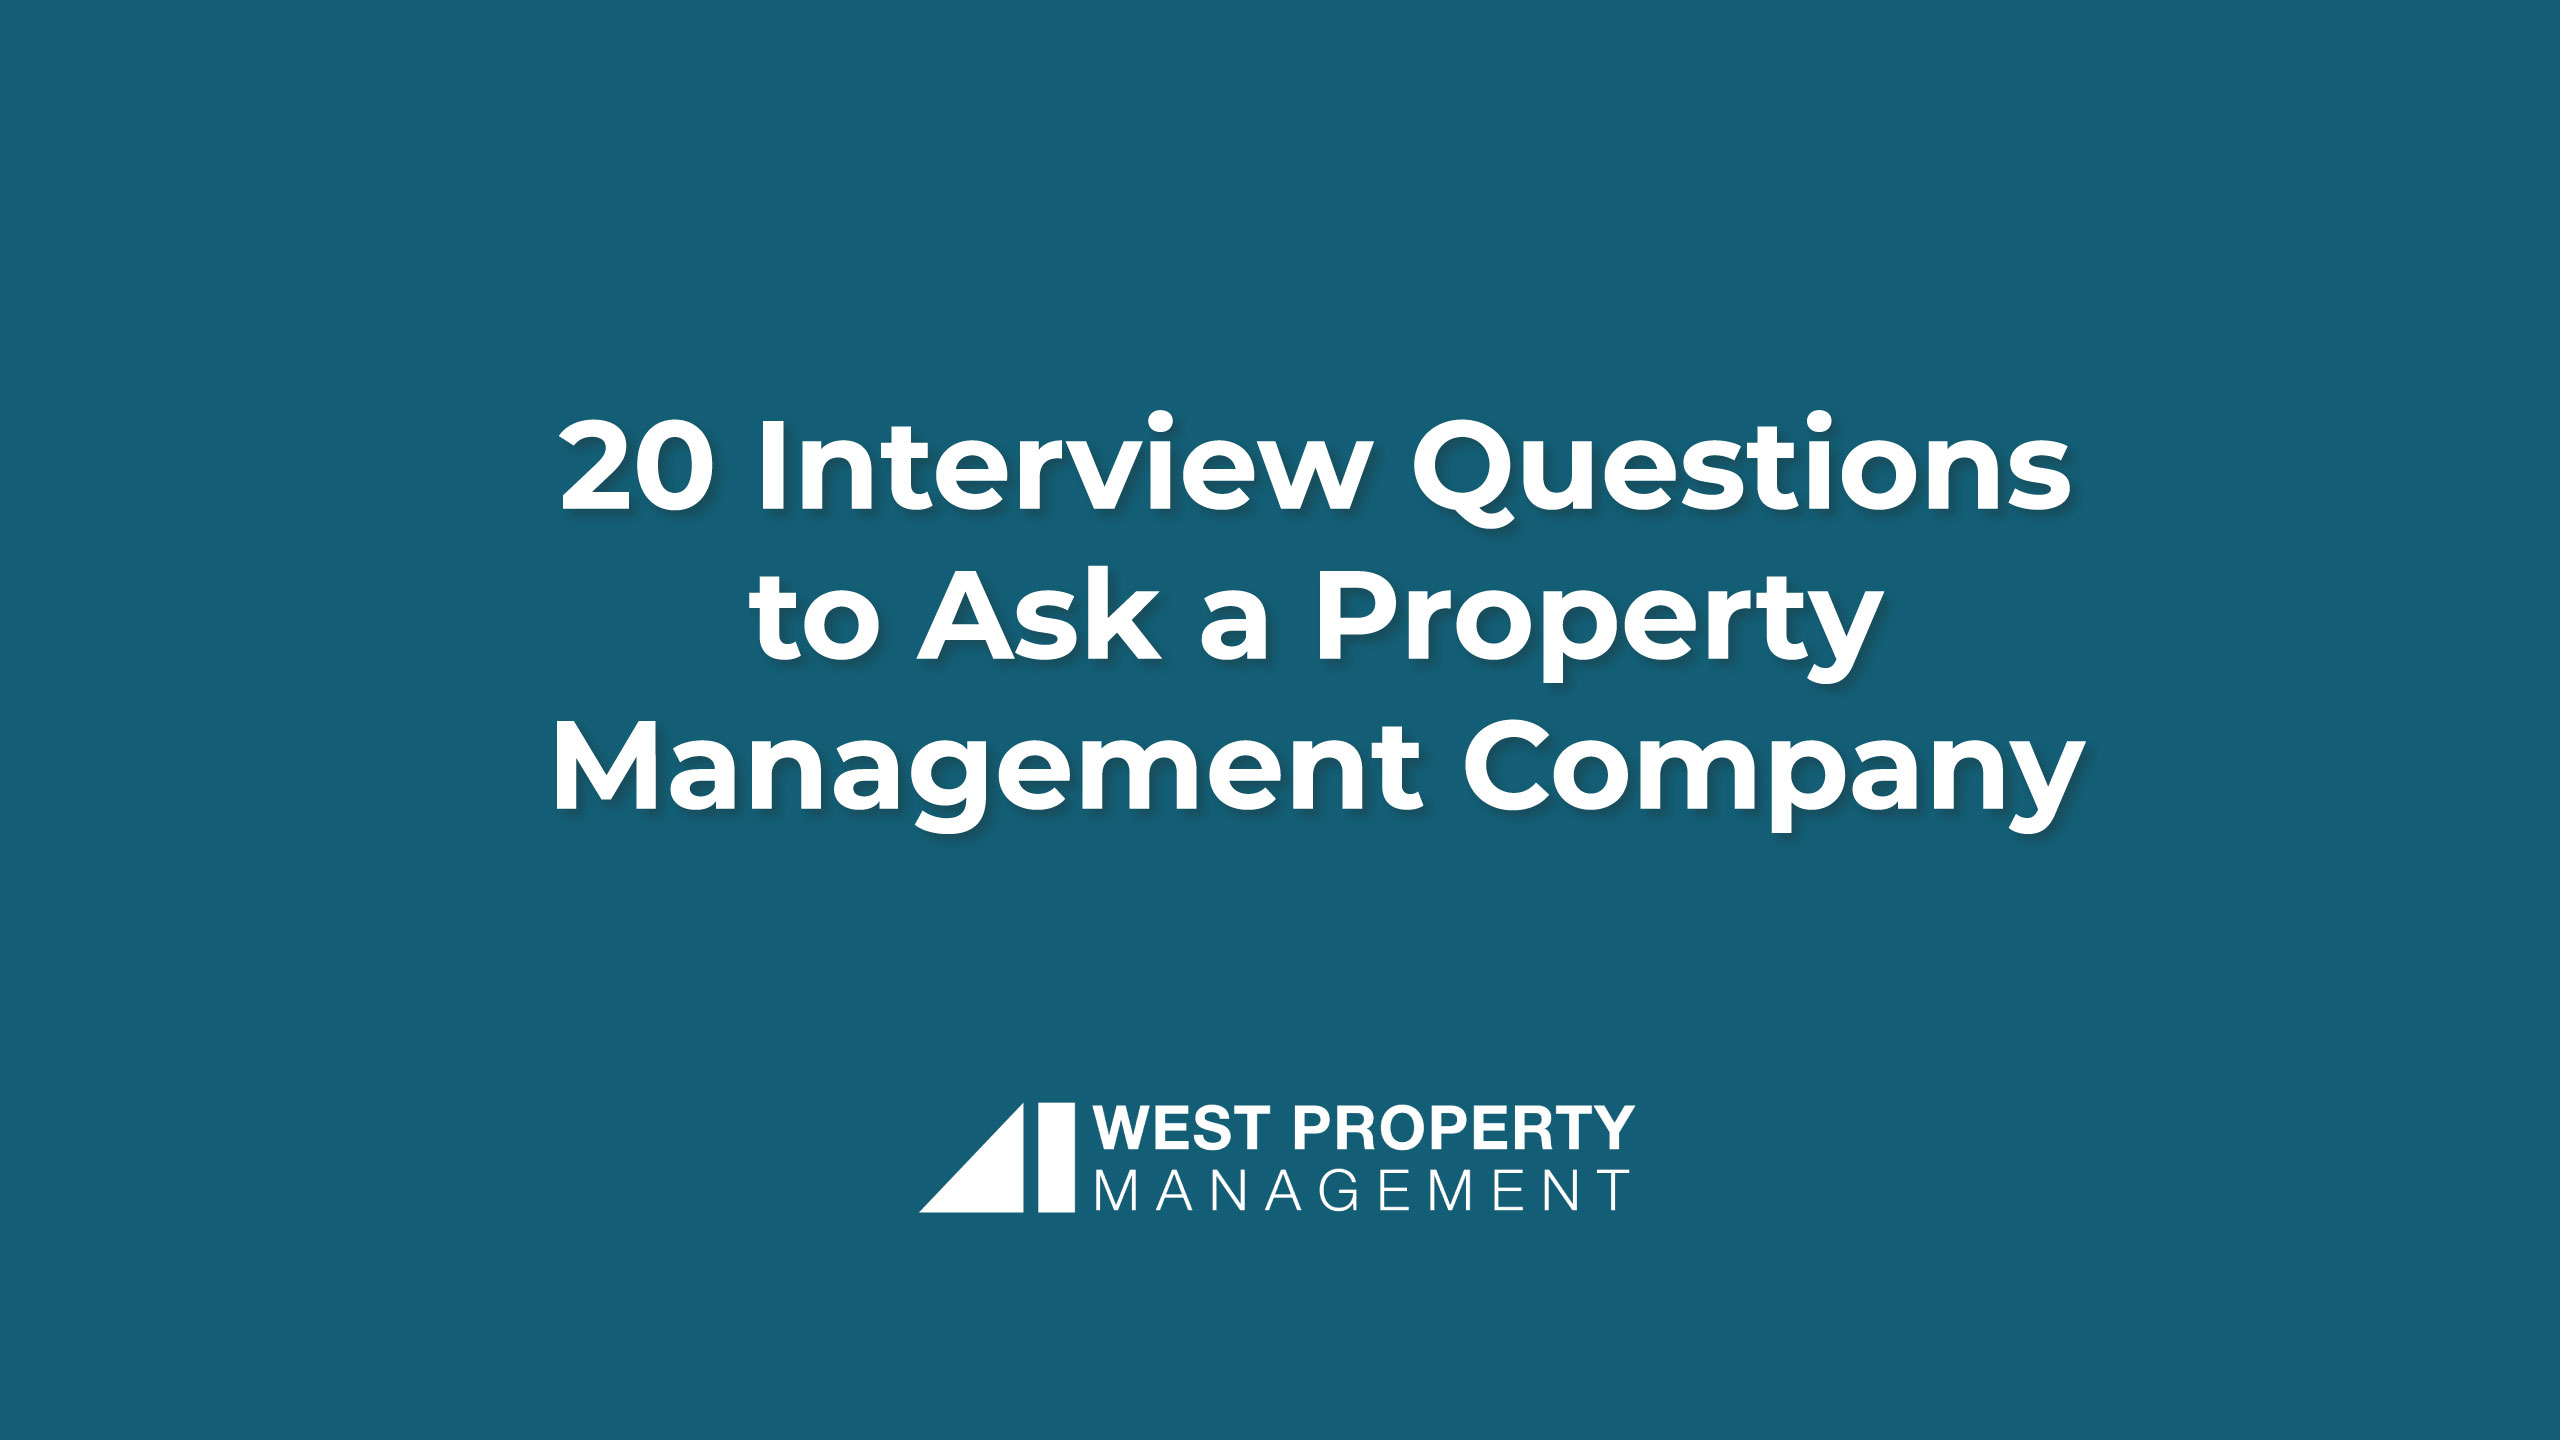 20 Interview Questions to Ask a Property Management Company